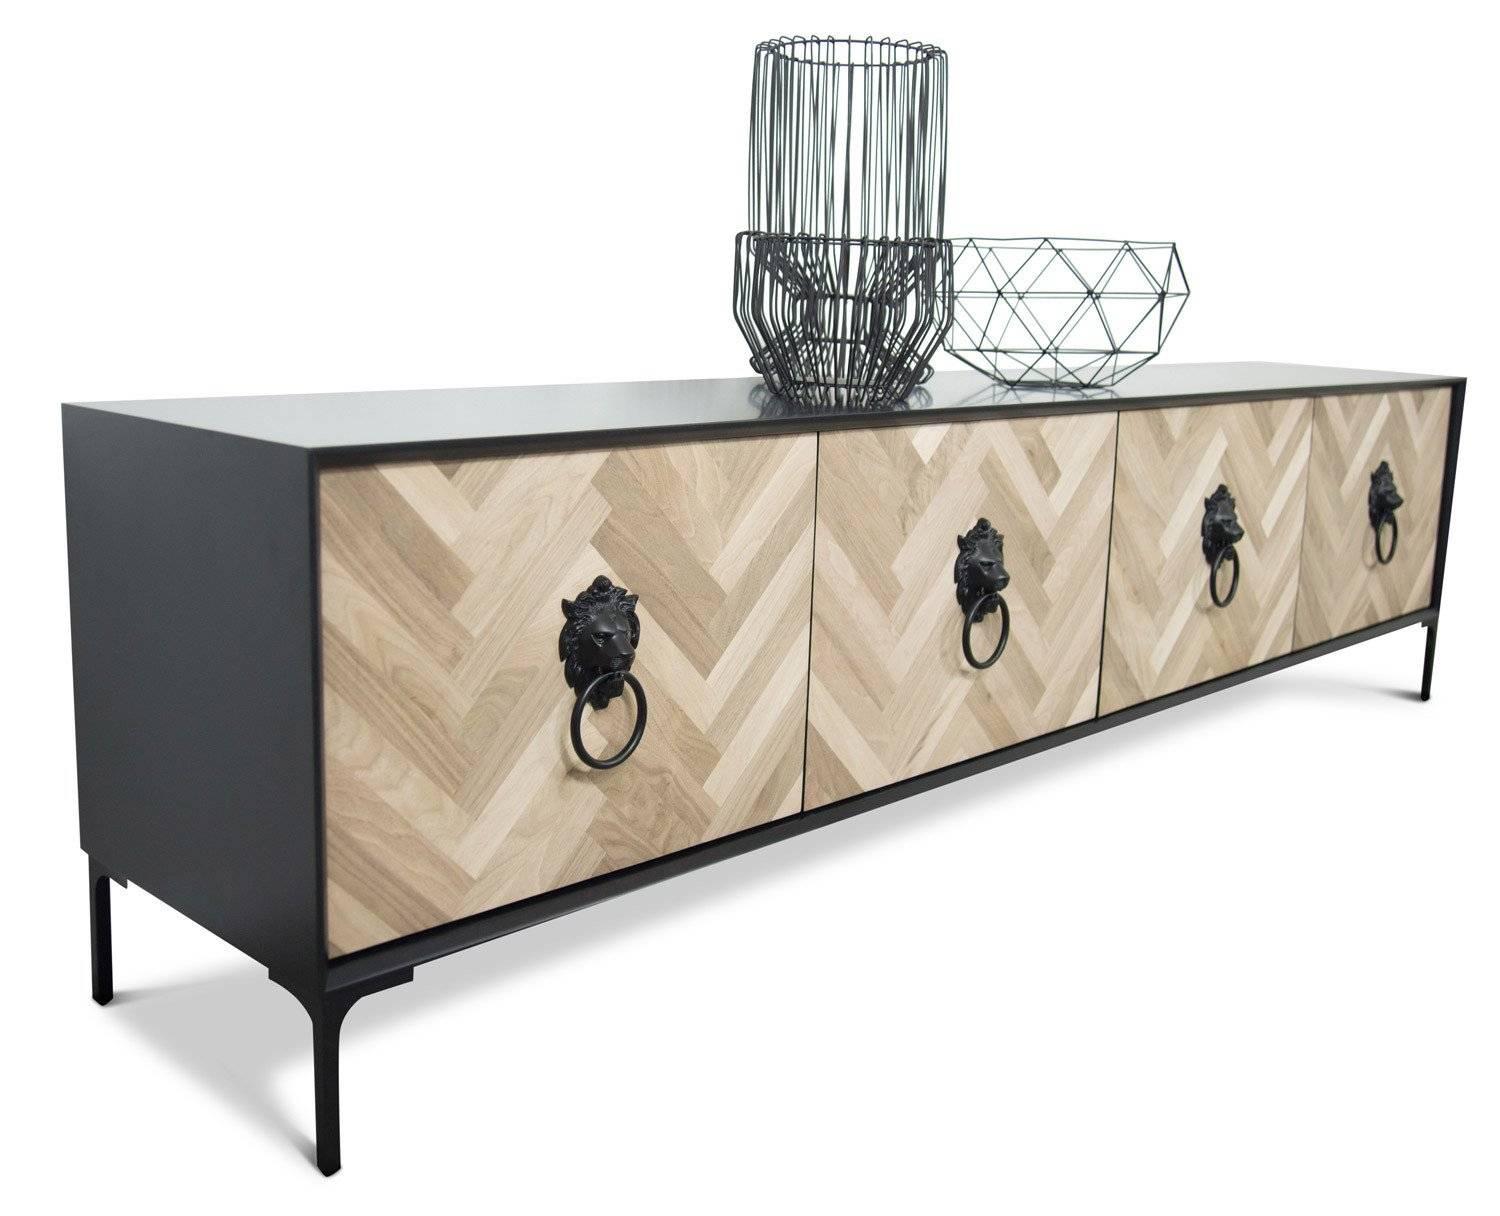 Introducing our newest addition to the Amalfi collection. This four-door credenza features hand-cut walnut chevron detail and matte black lacquer case finish with lion head hardware.
 
Dimensions:
84